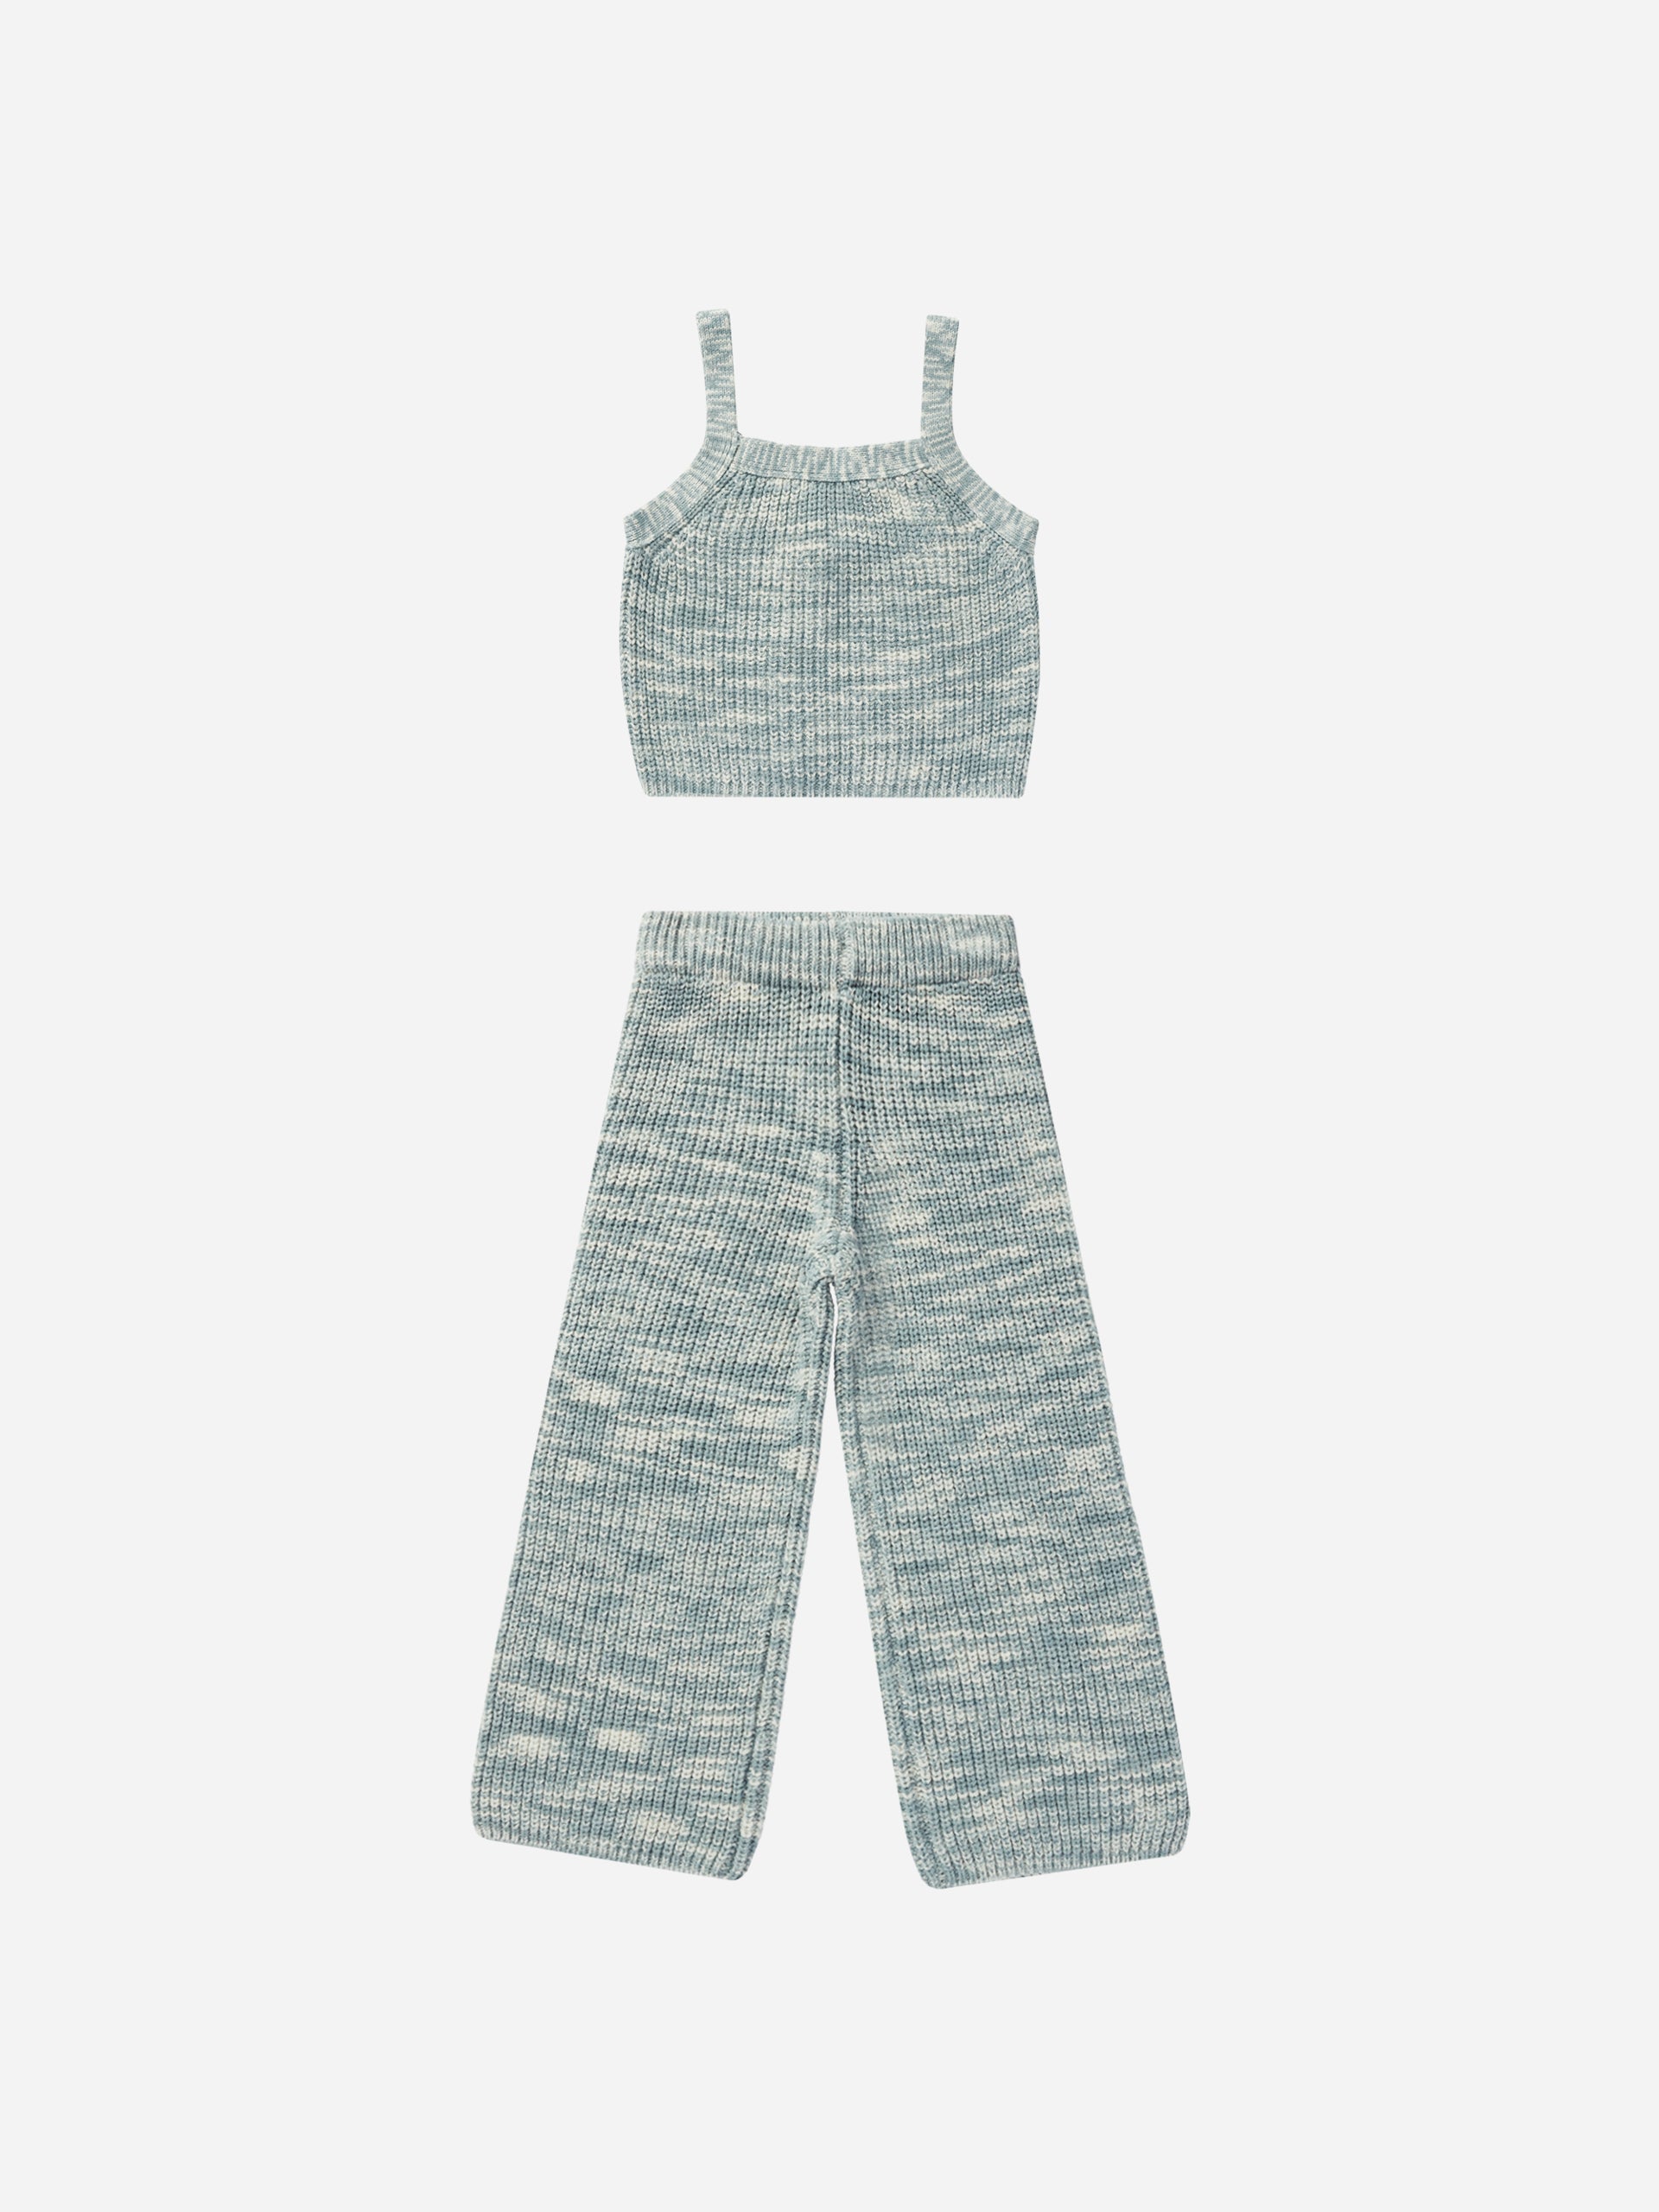 Malia Set || Heathered Blue - Rylee + Cru | Kids Clothes | Trendy Baby Clothes | Modern Infant Outfits |